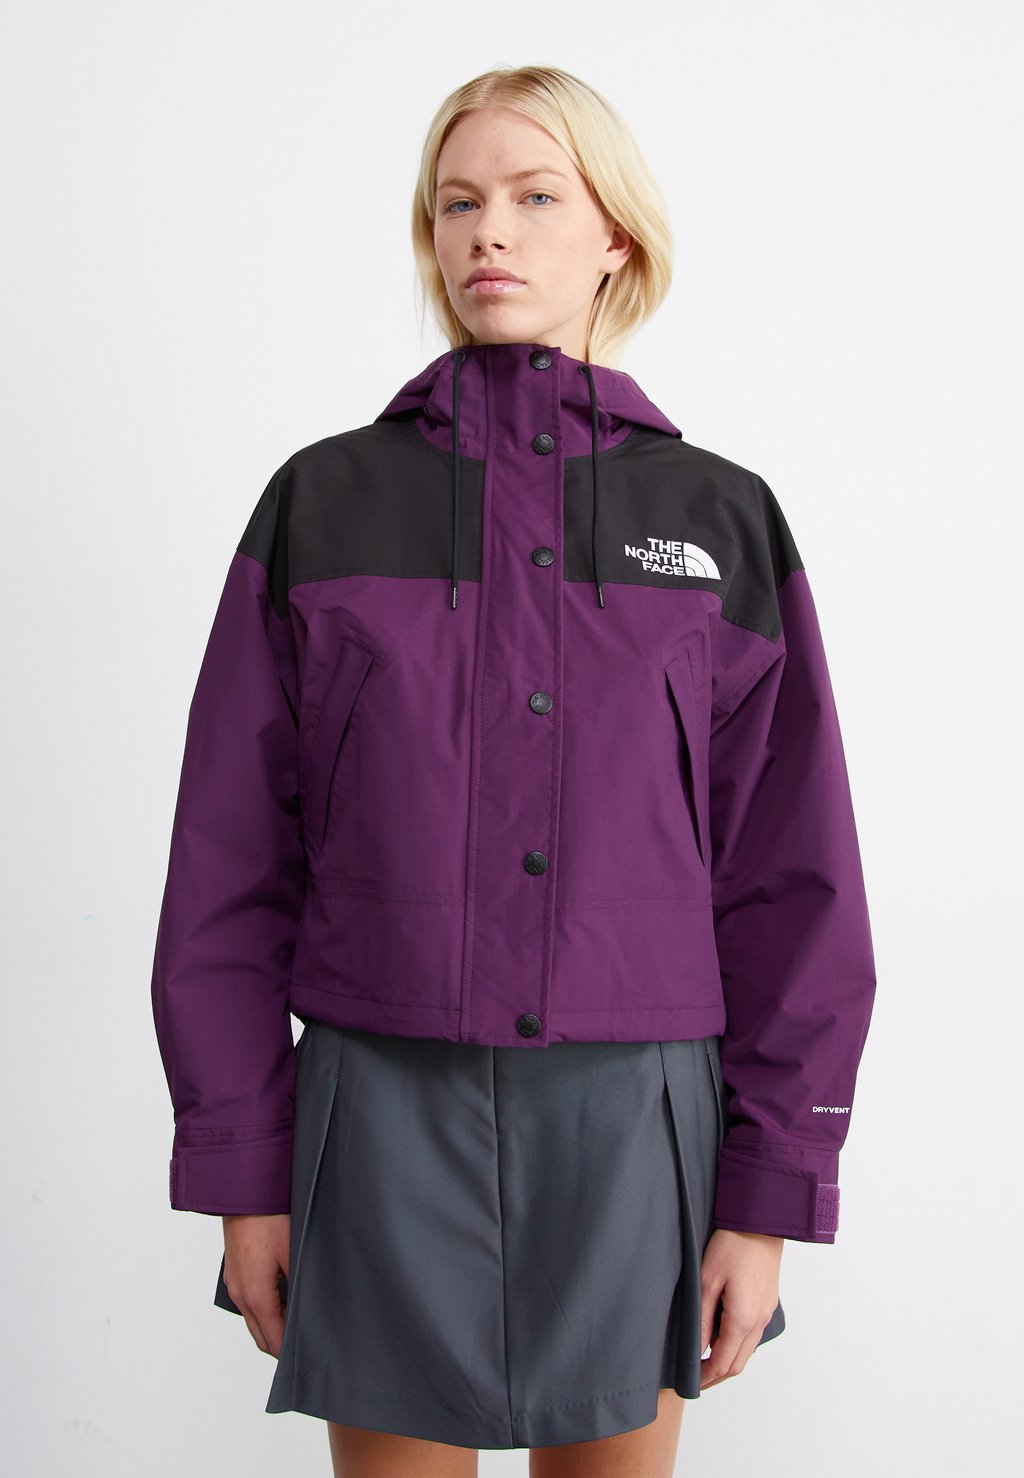 Водонепроницаемая Reign On Jacket The North Face, цвет black currant purple/black